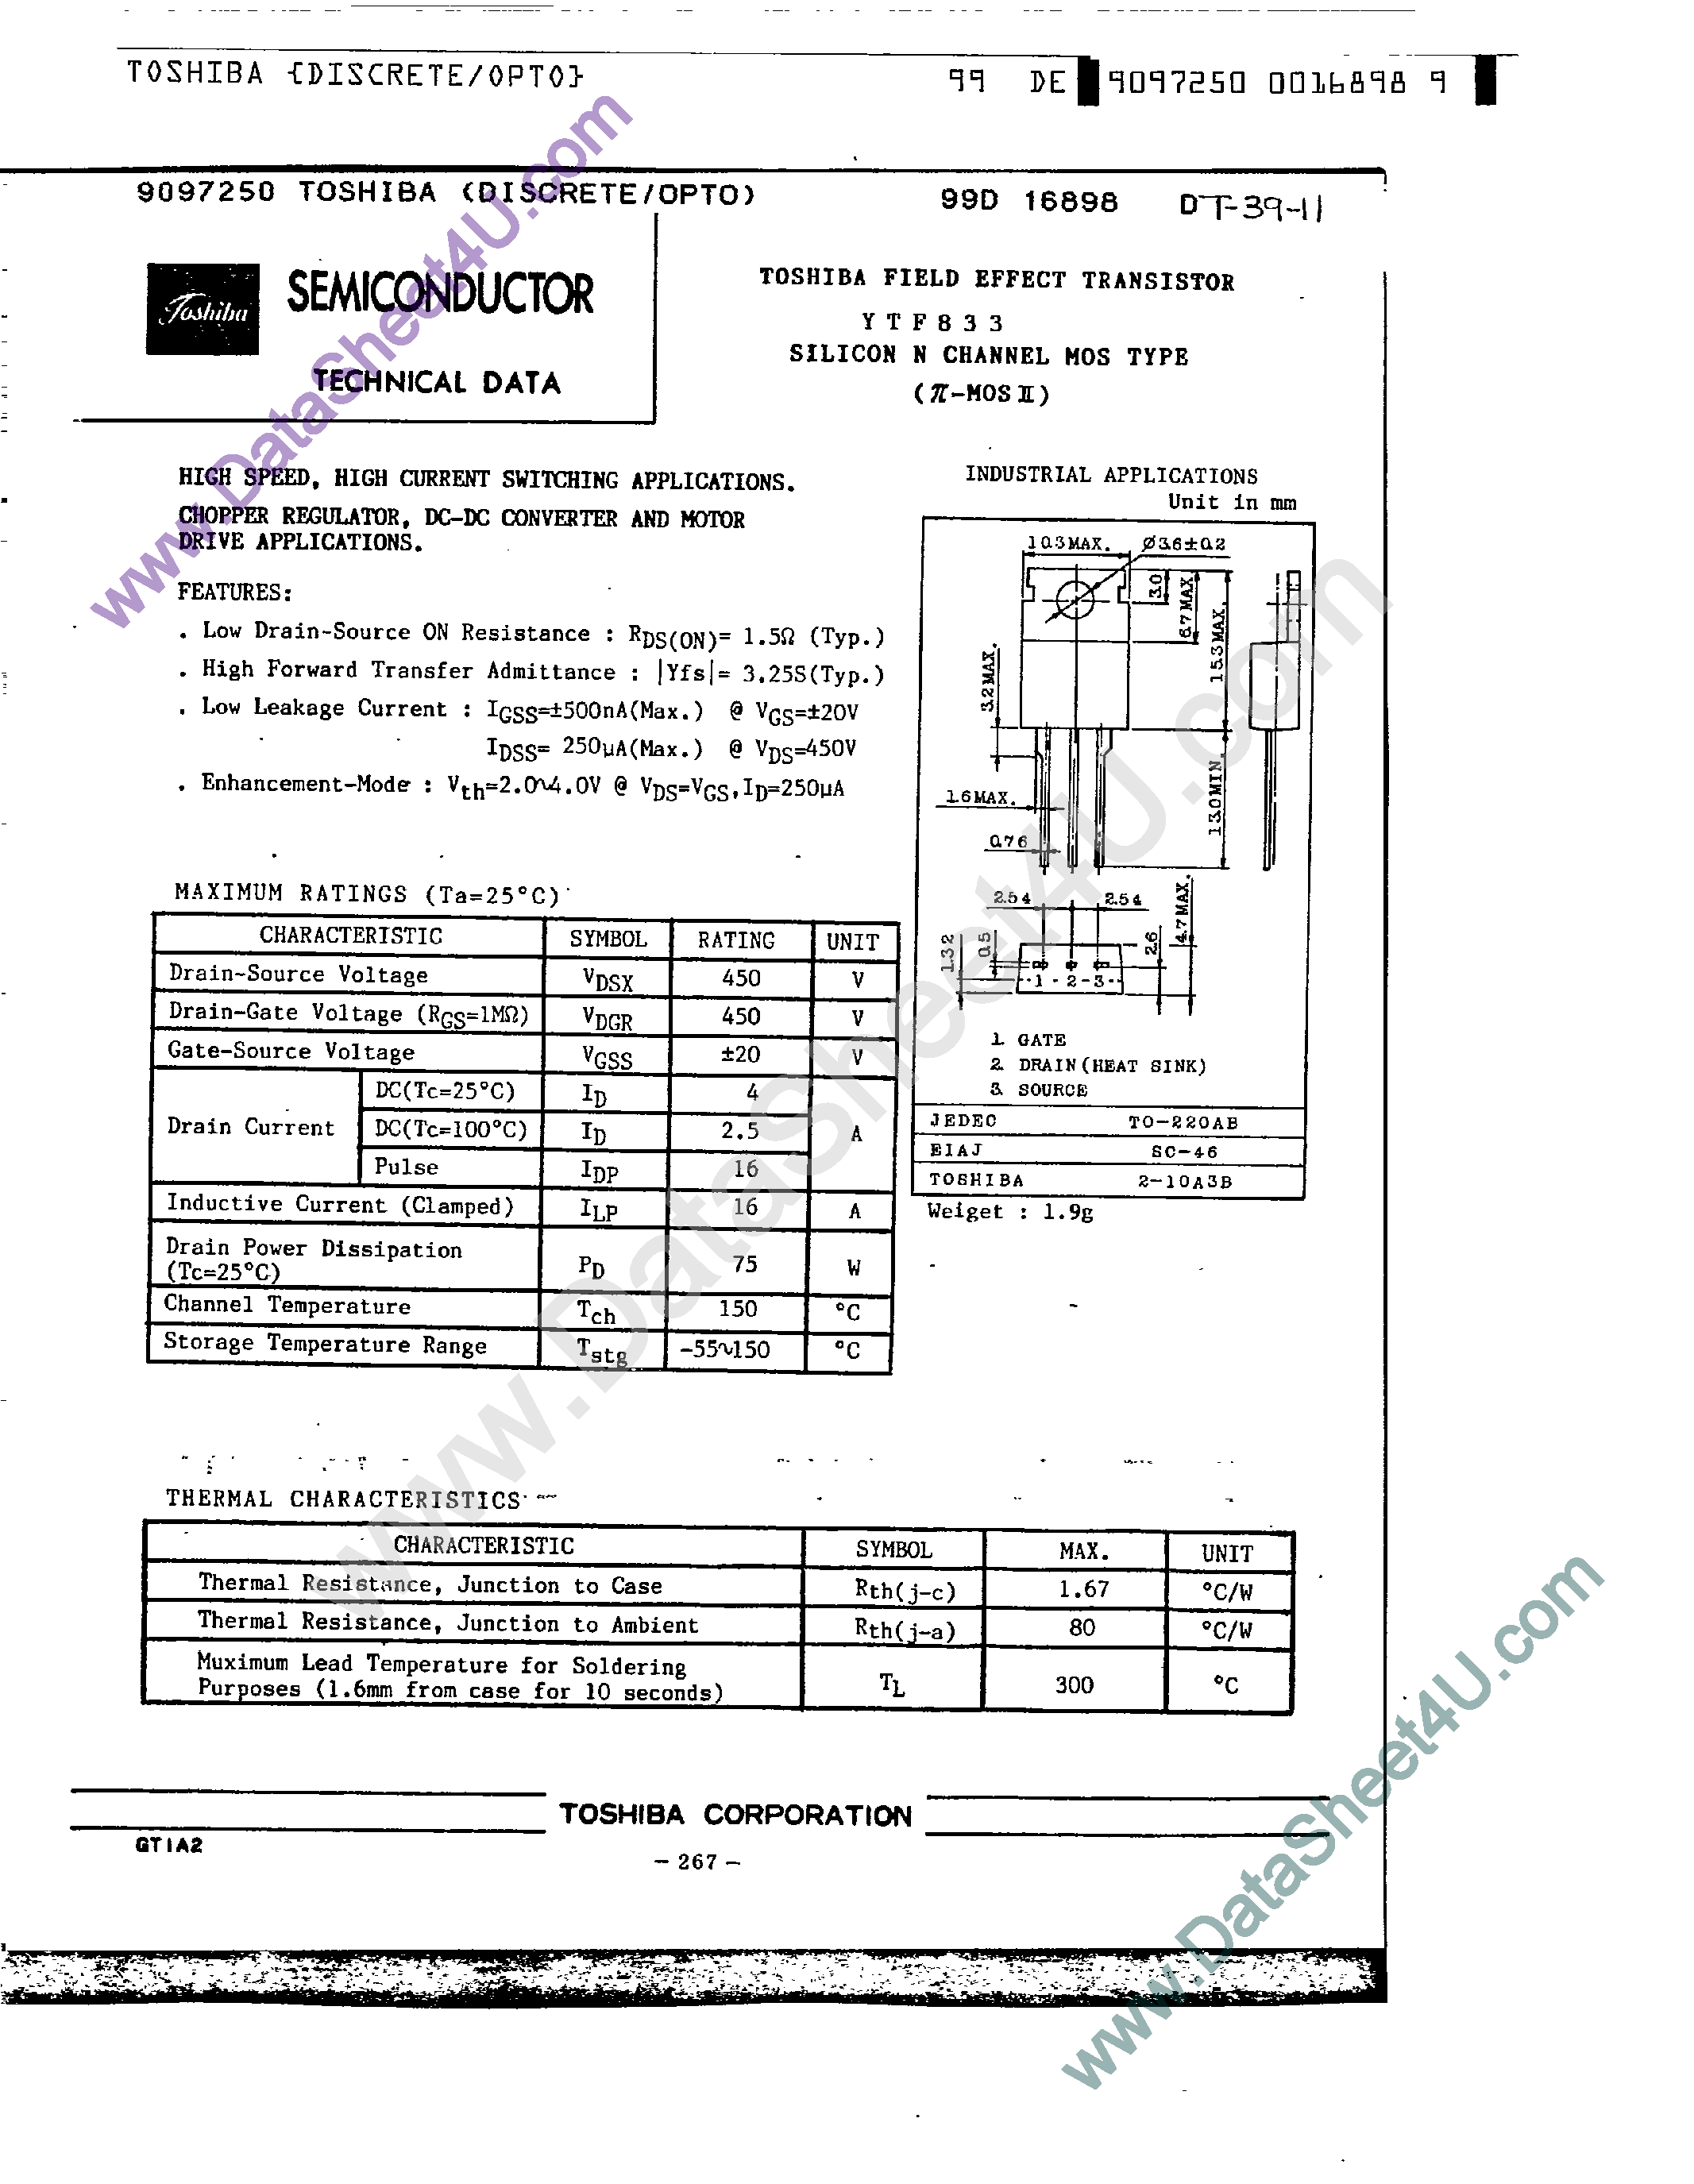 Datasheet YTF833 - Silicon N-Channel MOS Type page 1